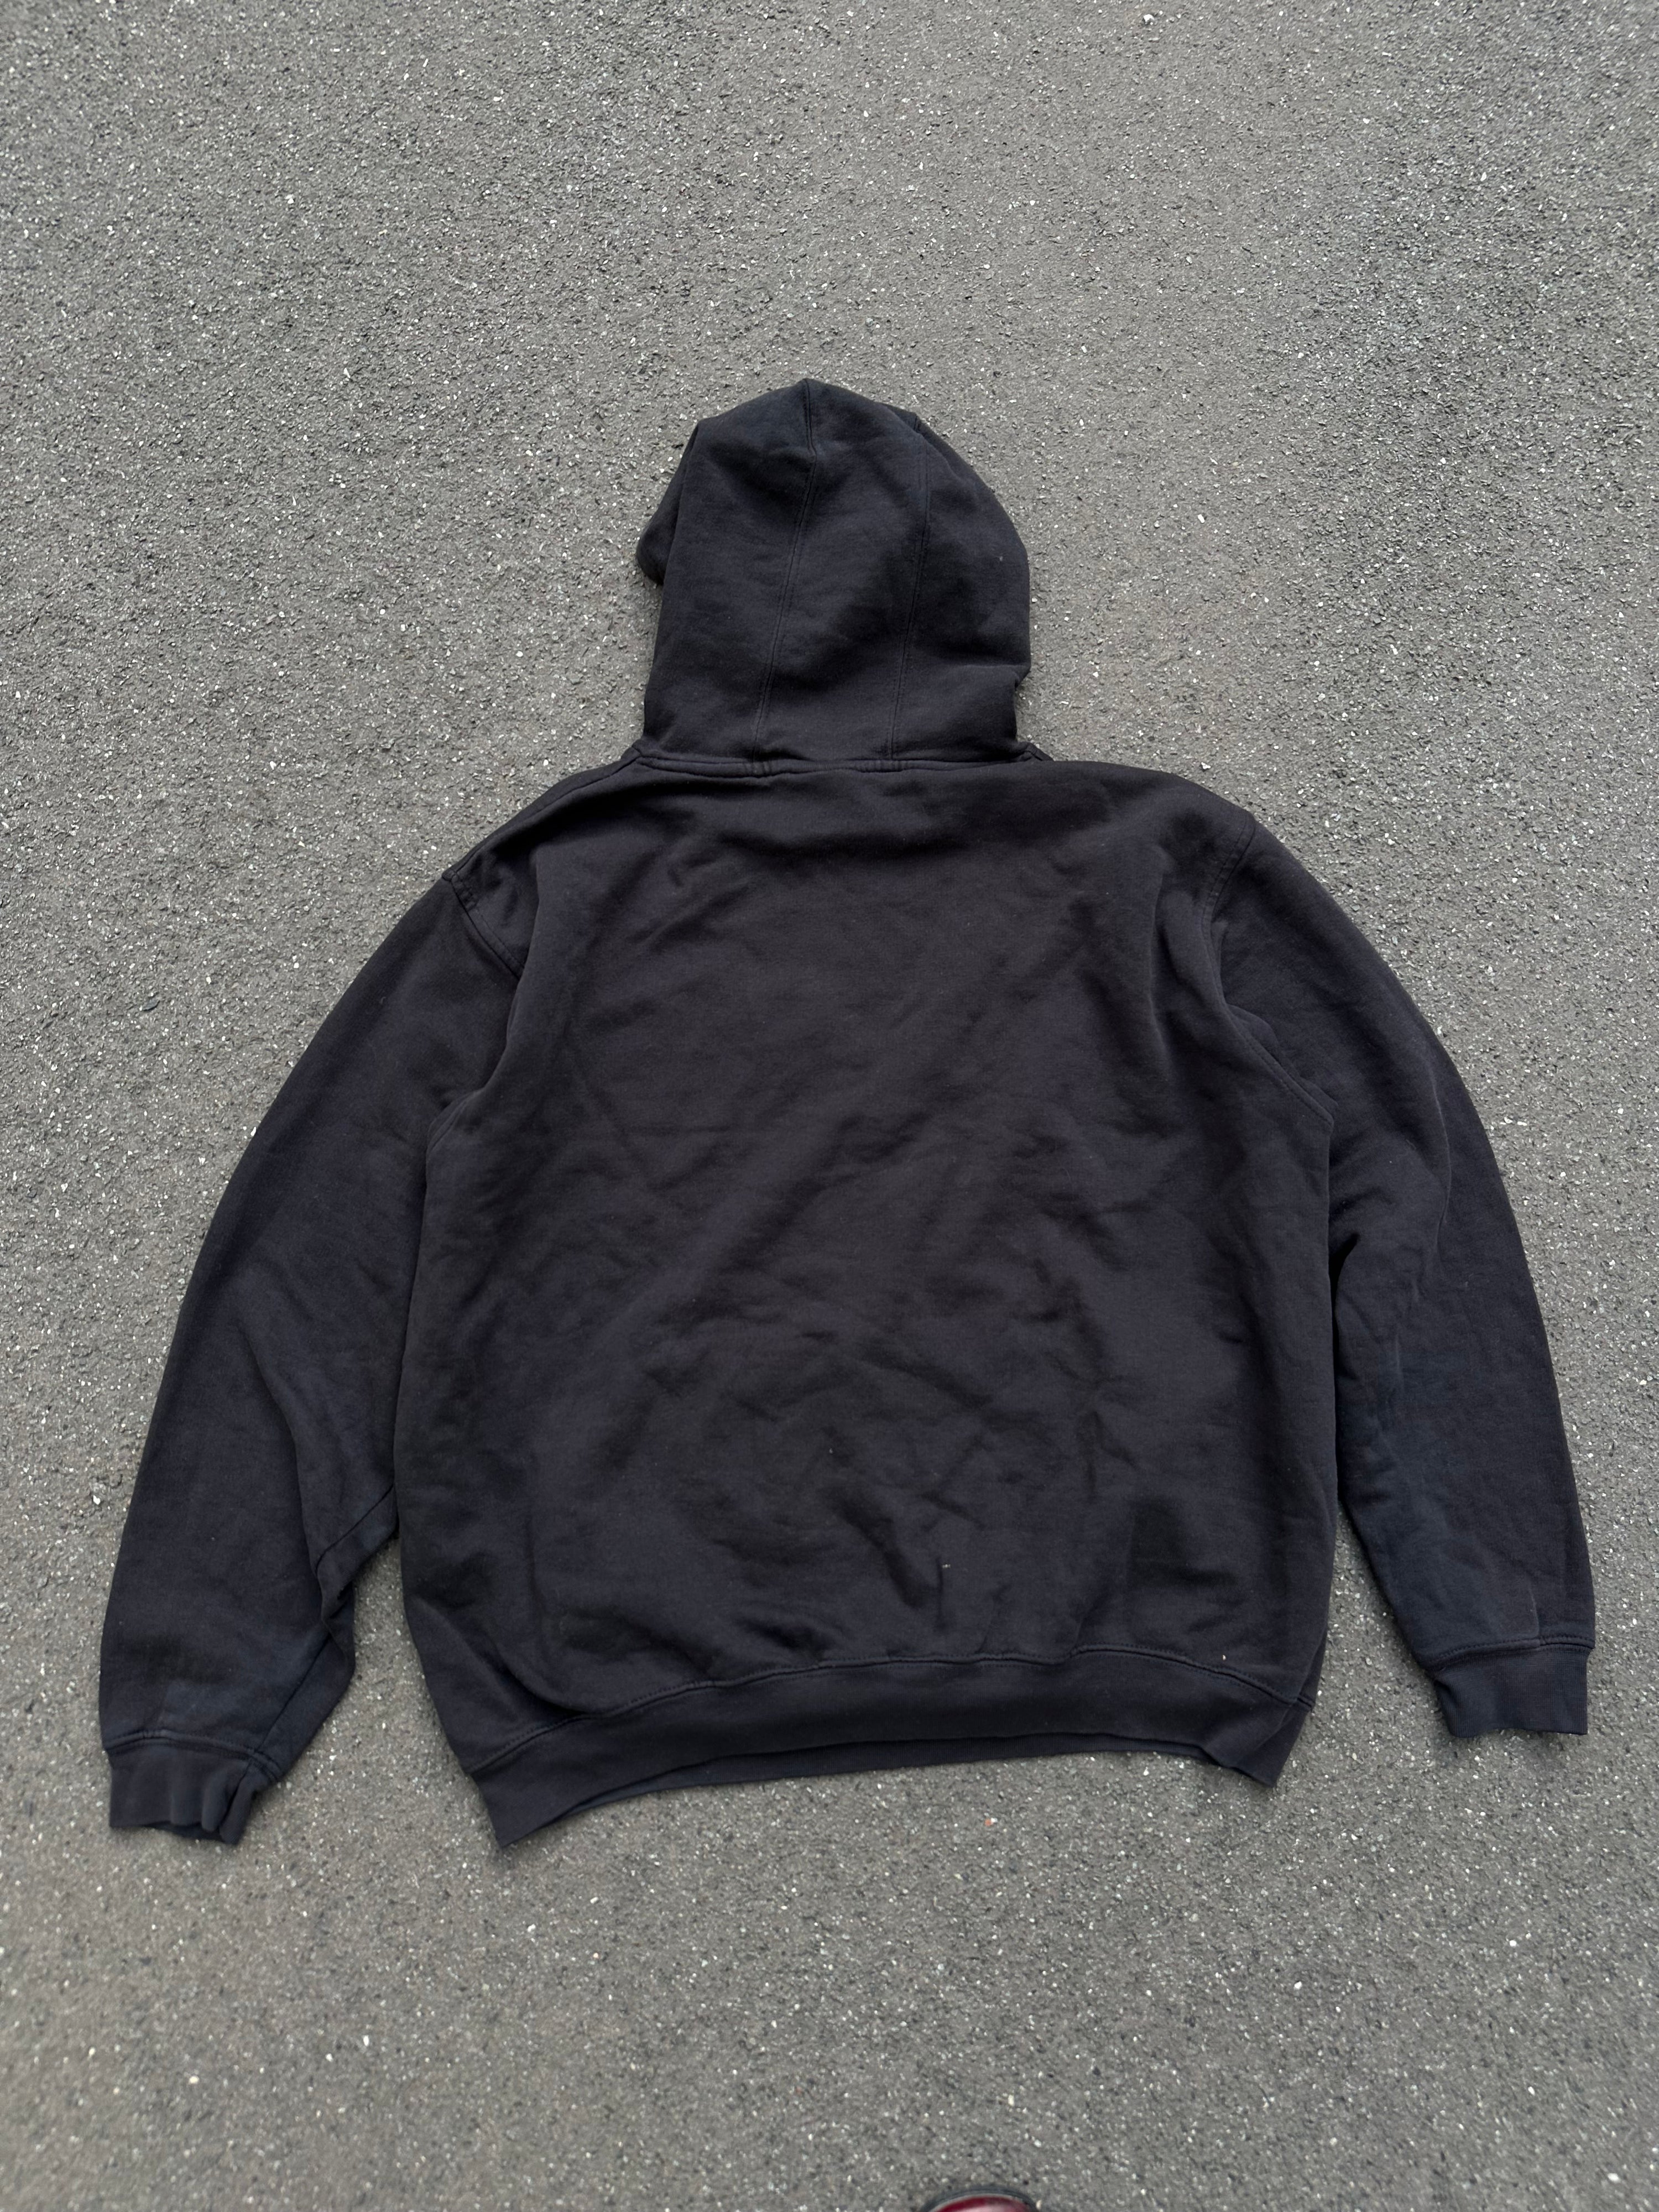 Umbro embroidered Hoodie (L)